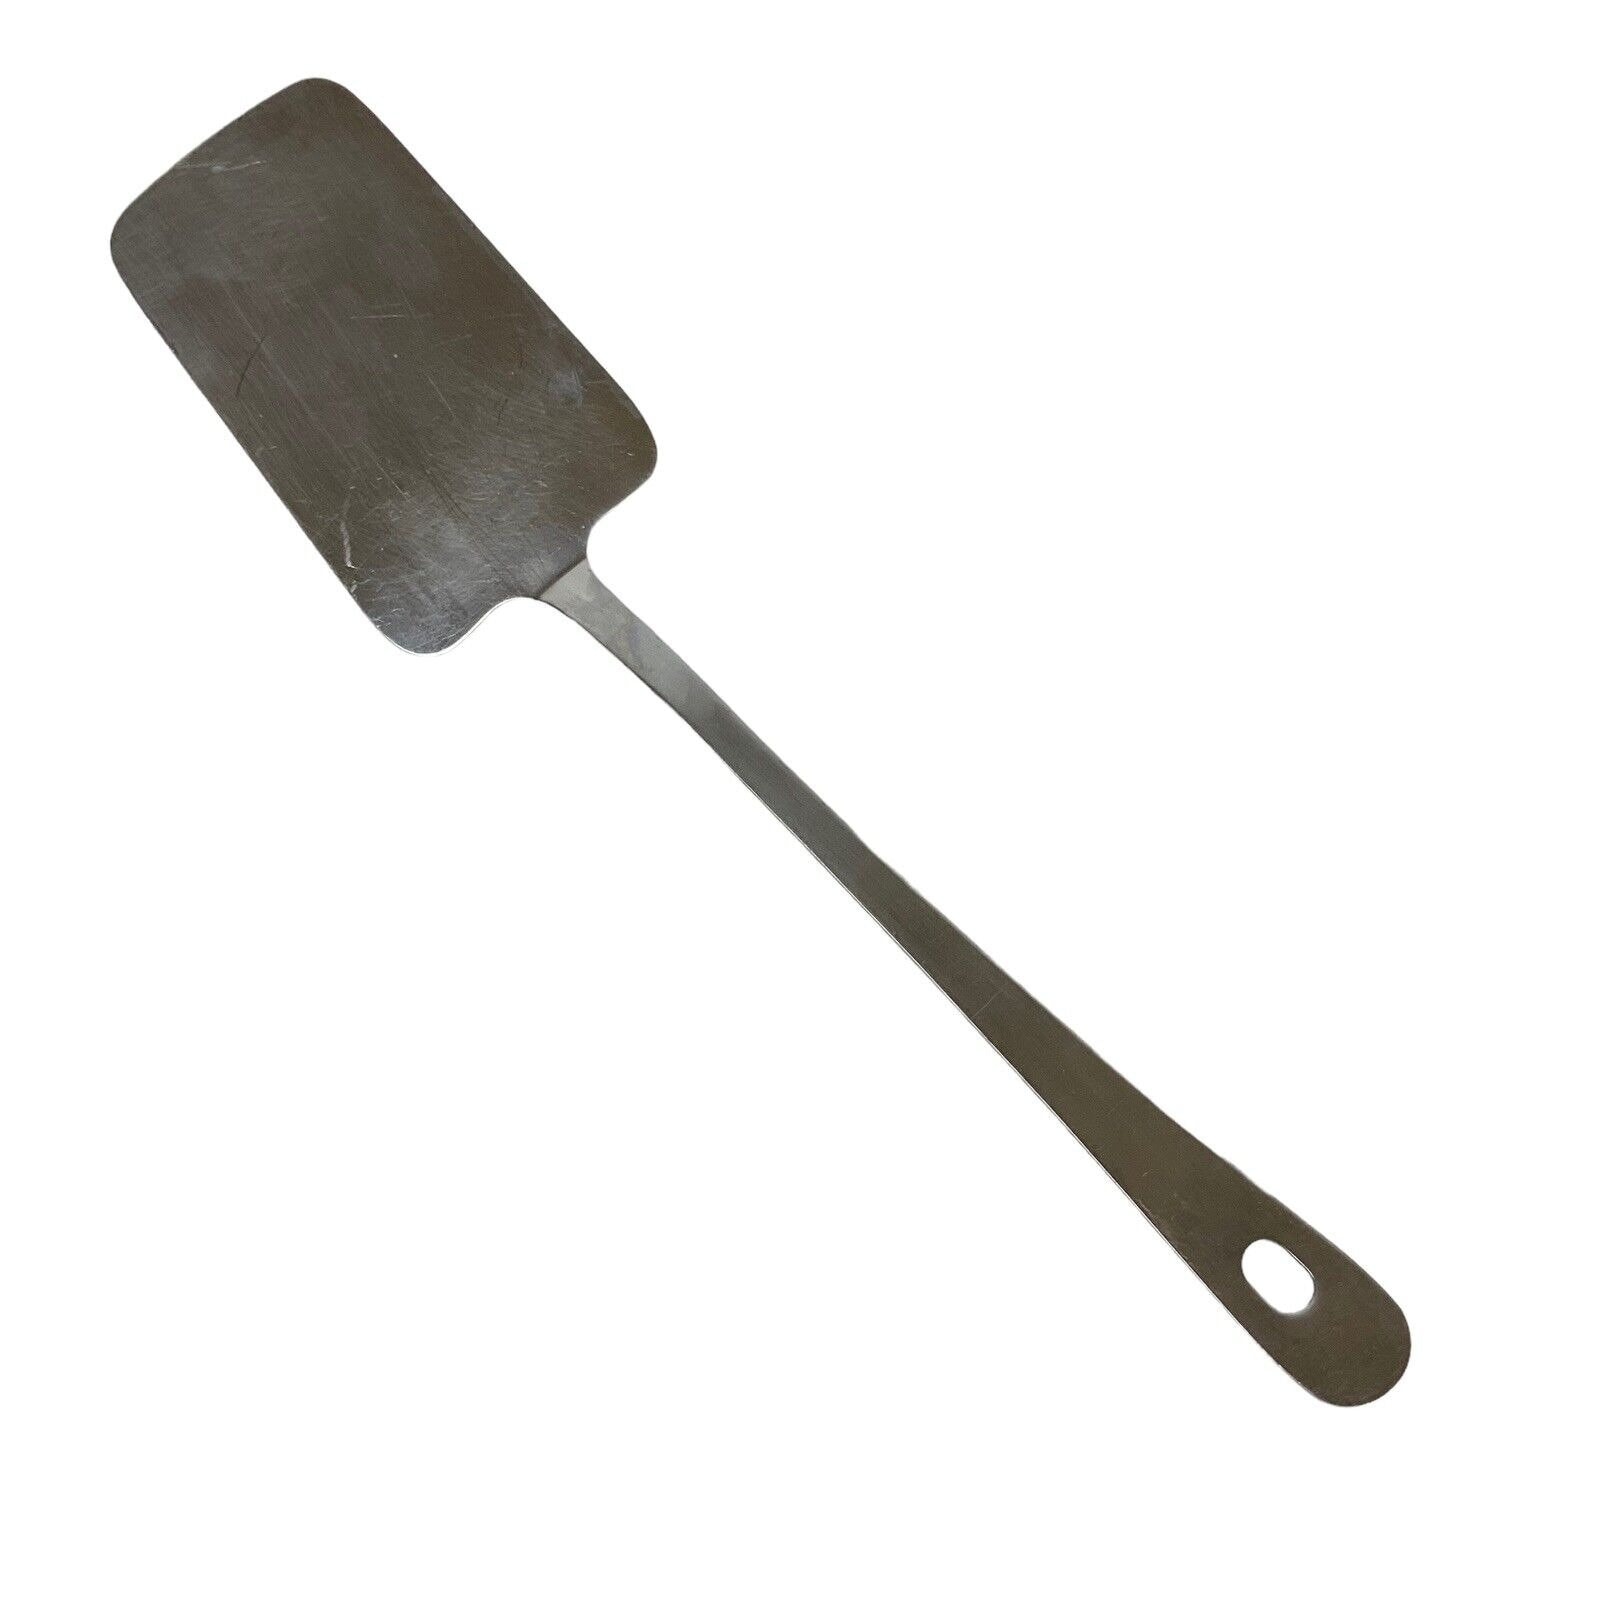 Pampered Chef Large Long Handled Spatula Spreader Stainless Steel